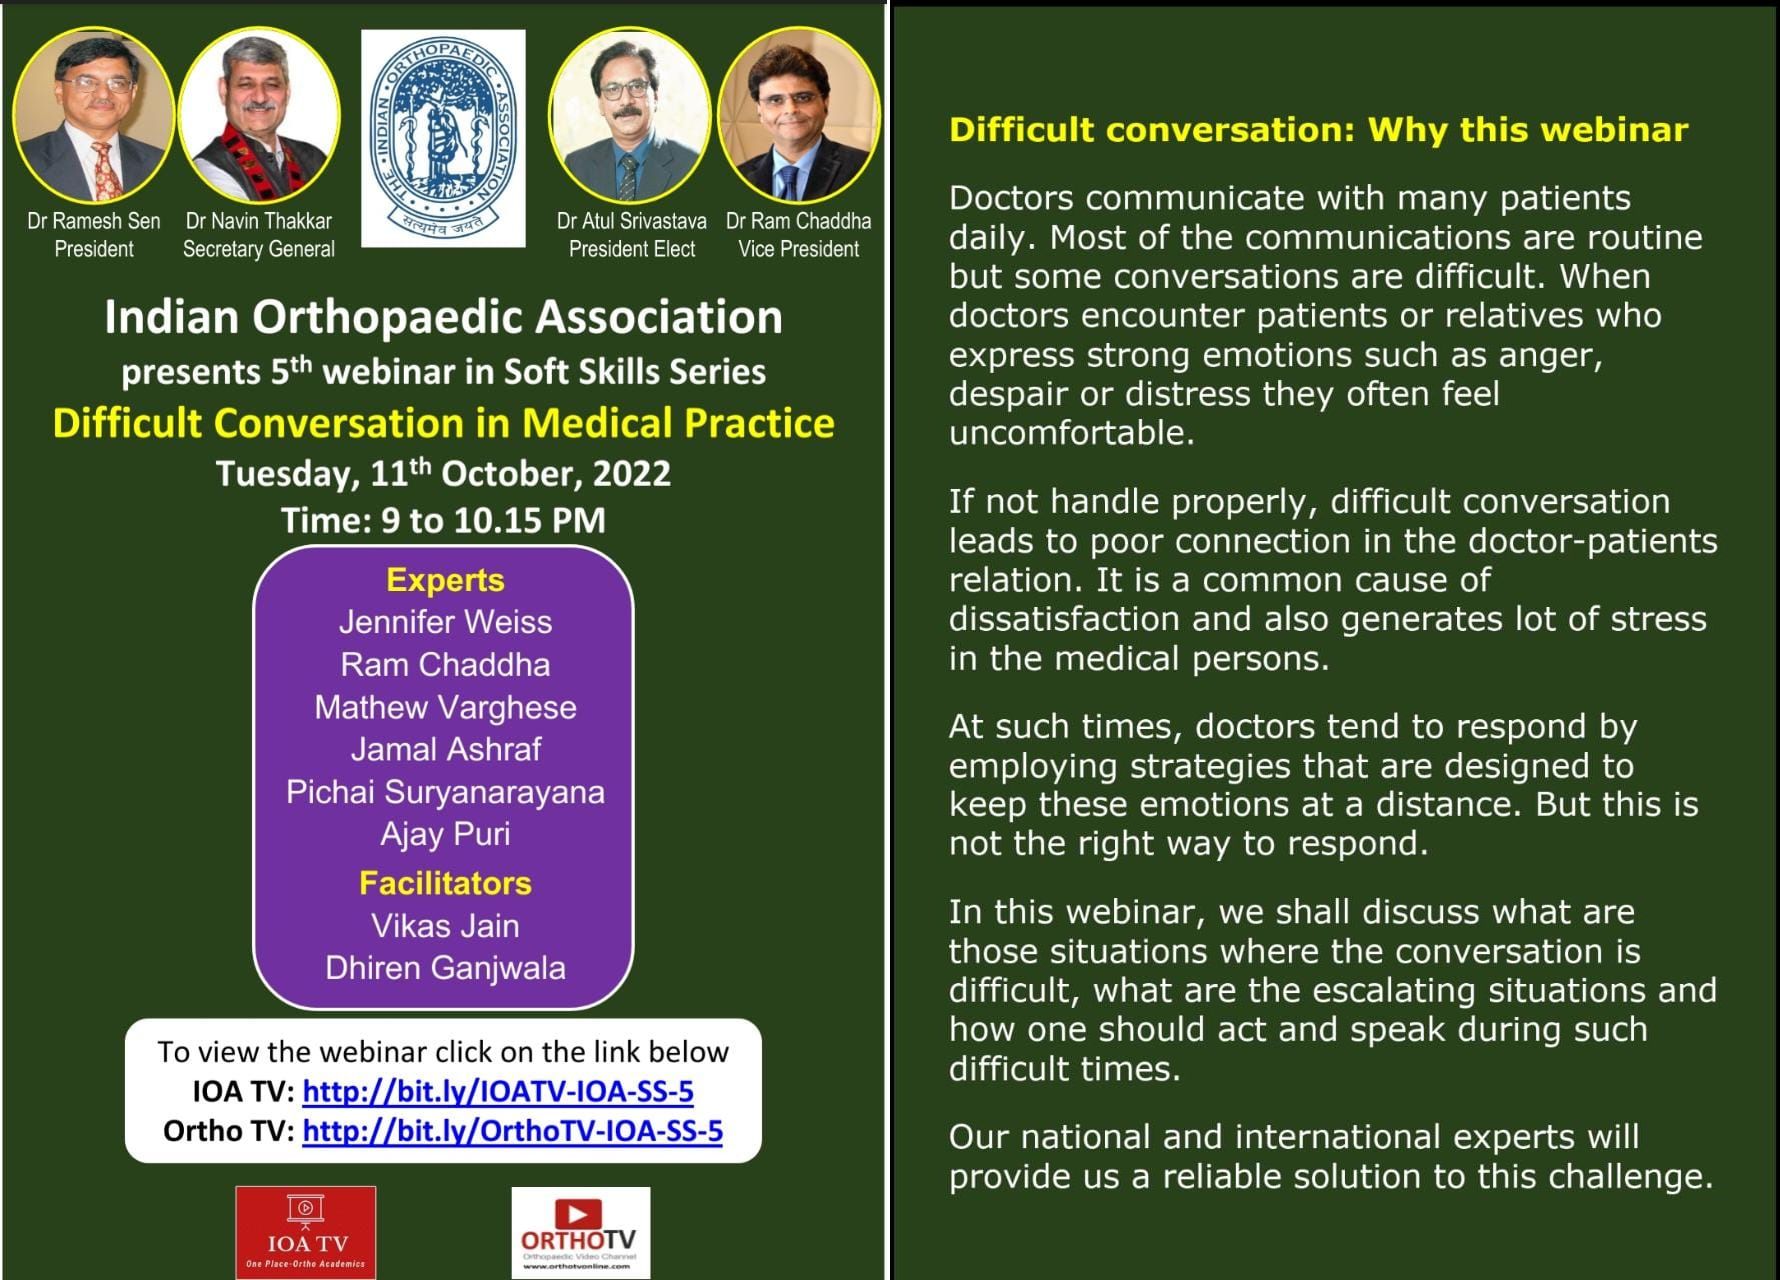 Indian Orthopaedic Association presents 5th webinar in Soft Skills Series - Difficult Conversation in Medical Practice